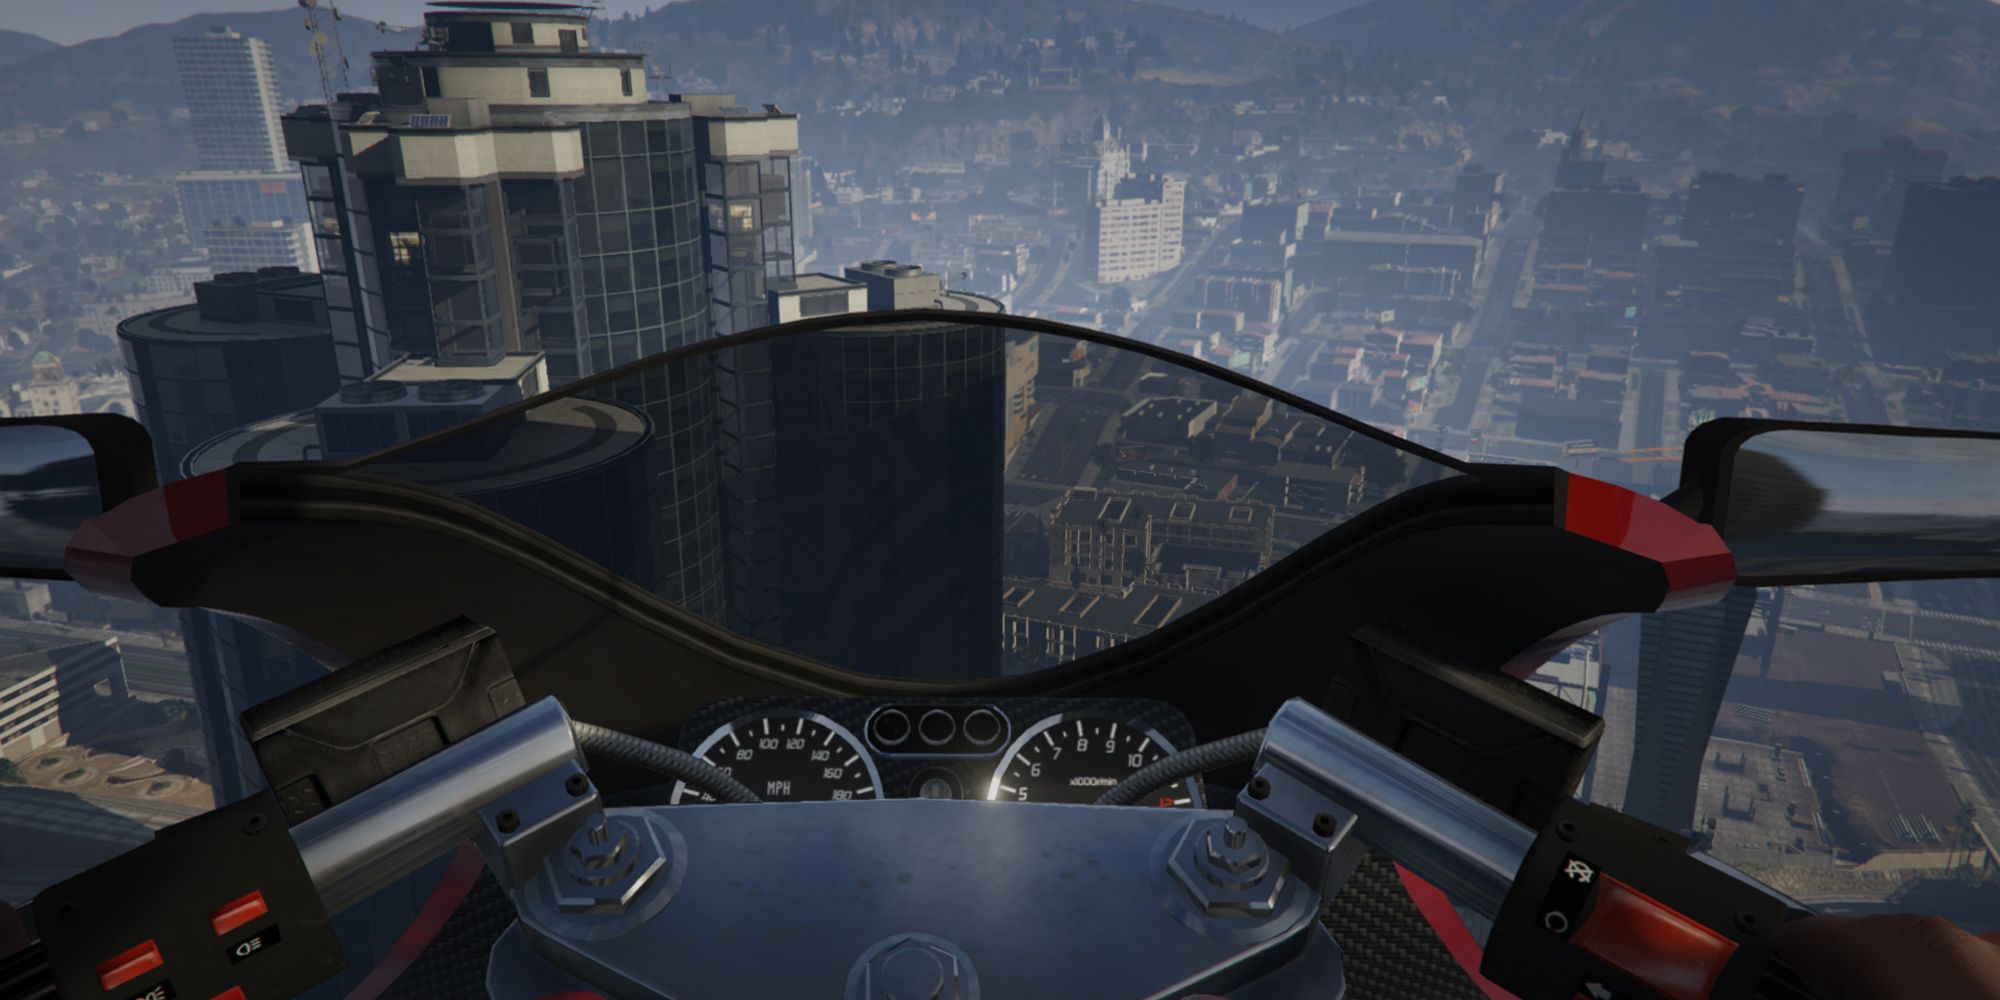 Performing A Parachute Jump of Maze Bank Tower in GTA V